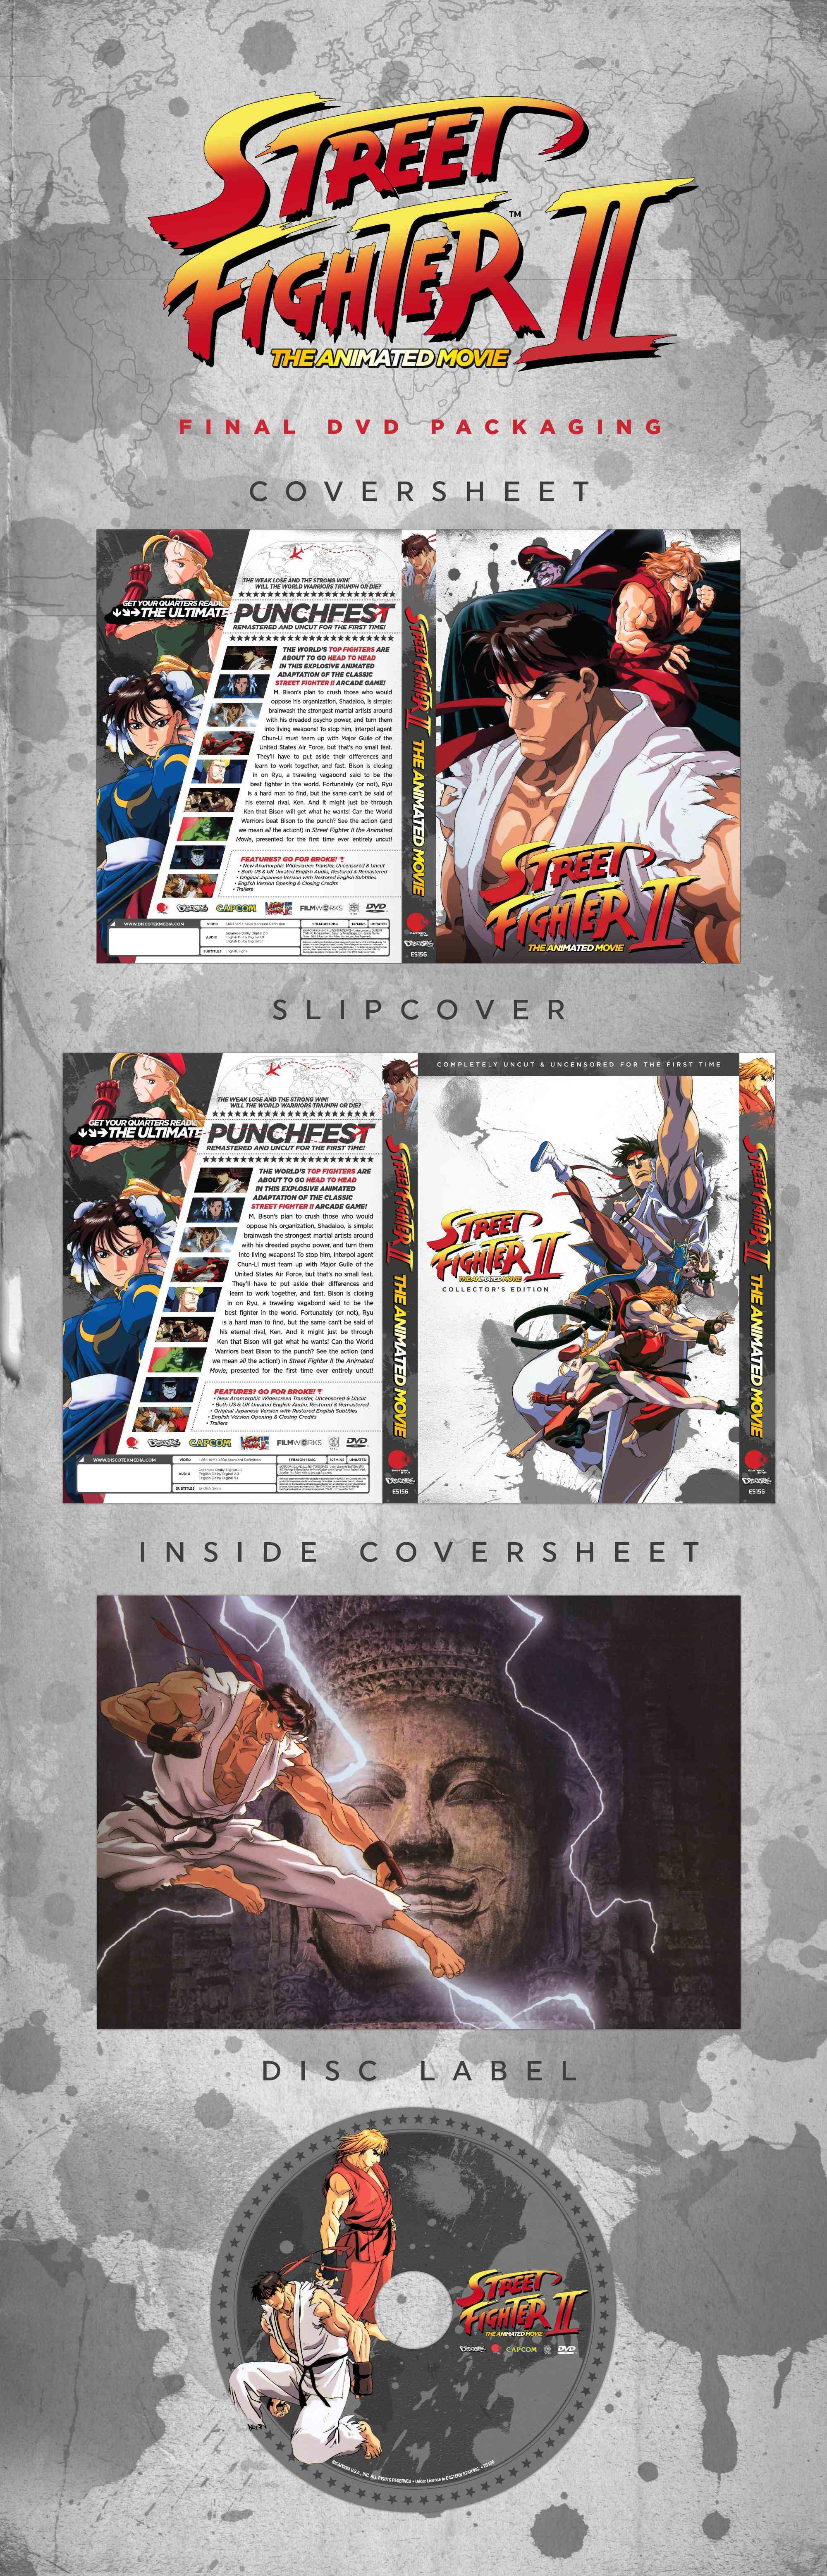 Street-Fighter-II-The-Animated-Movie-DVD-Cover-Art-02